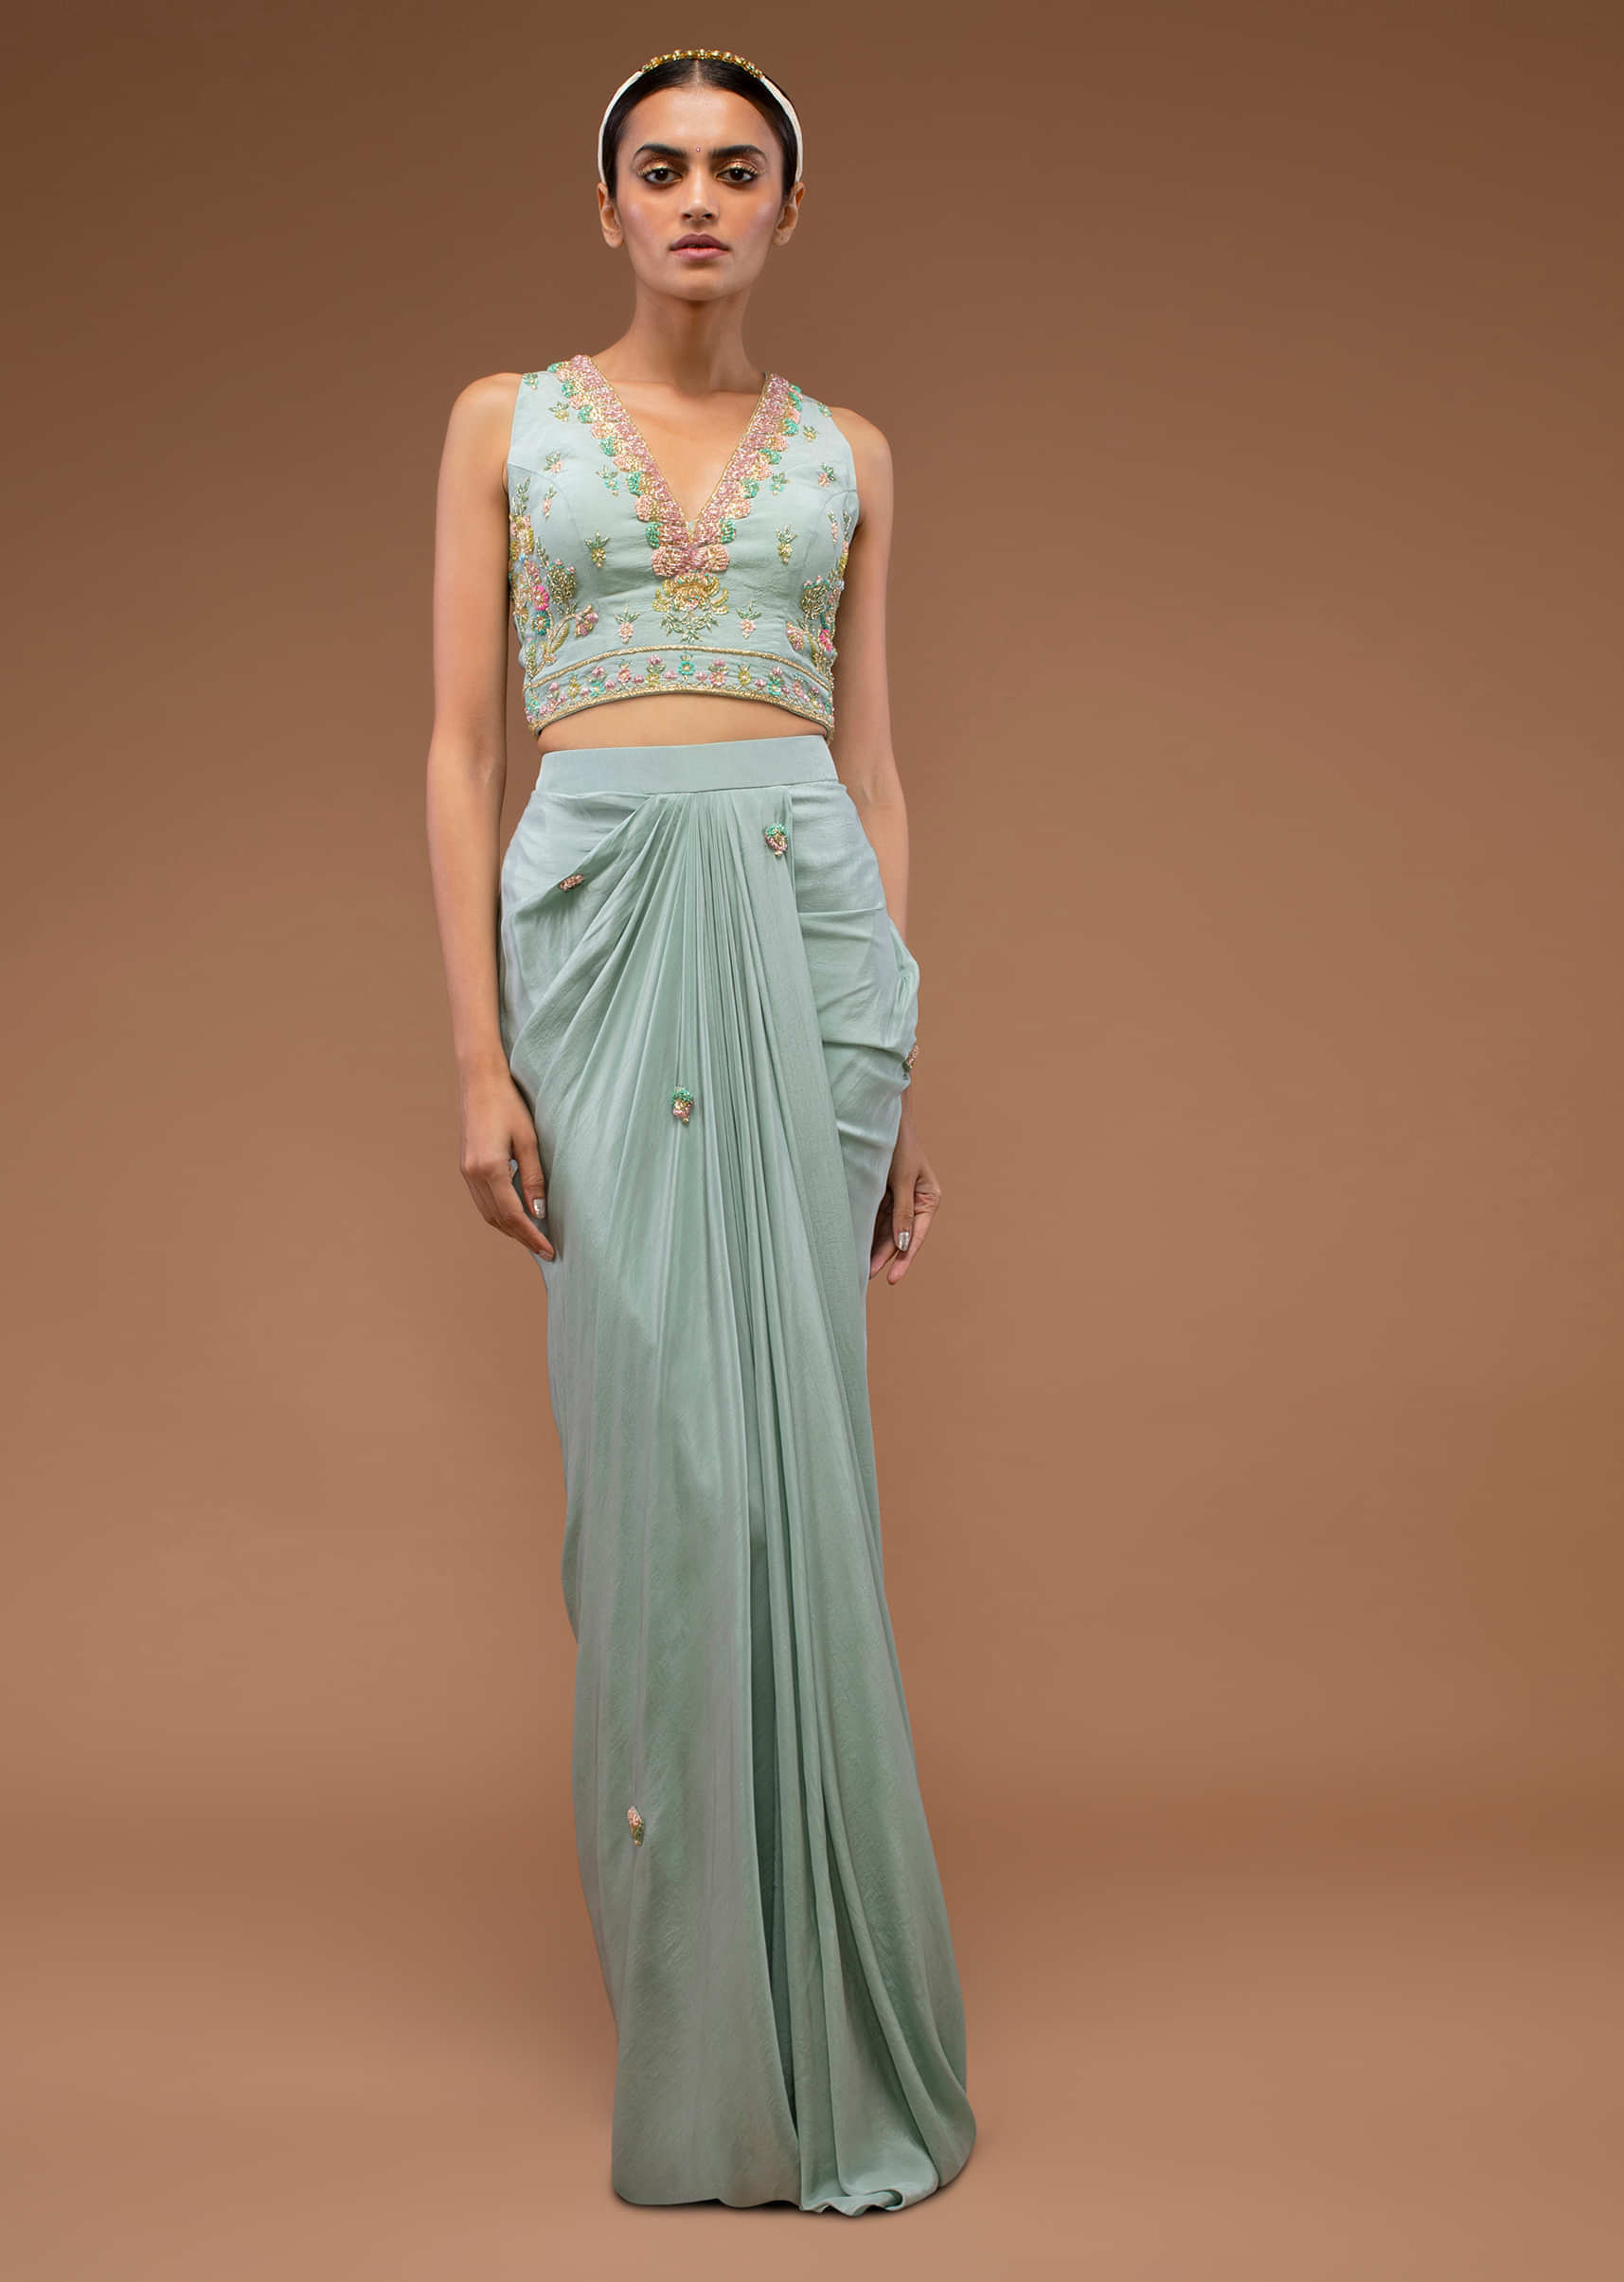 Harbor Grey-Green Mermaid Skirt And A Crop Top Set In 3D Cut Dana Motifs Embroidery, Paired With A Crop Top With A Plunging V Neckline